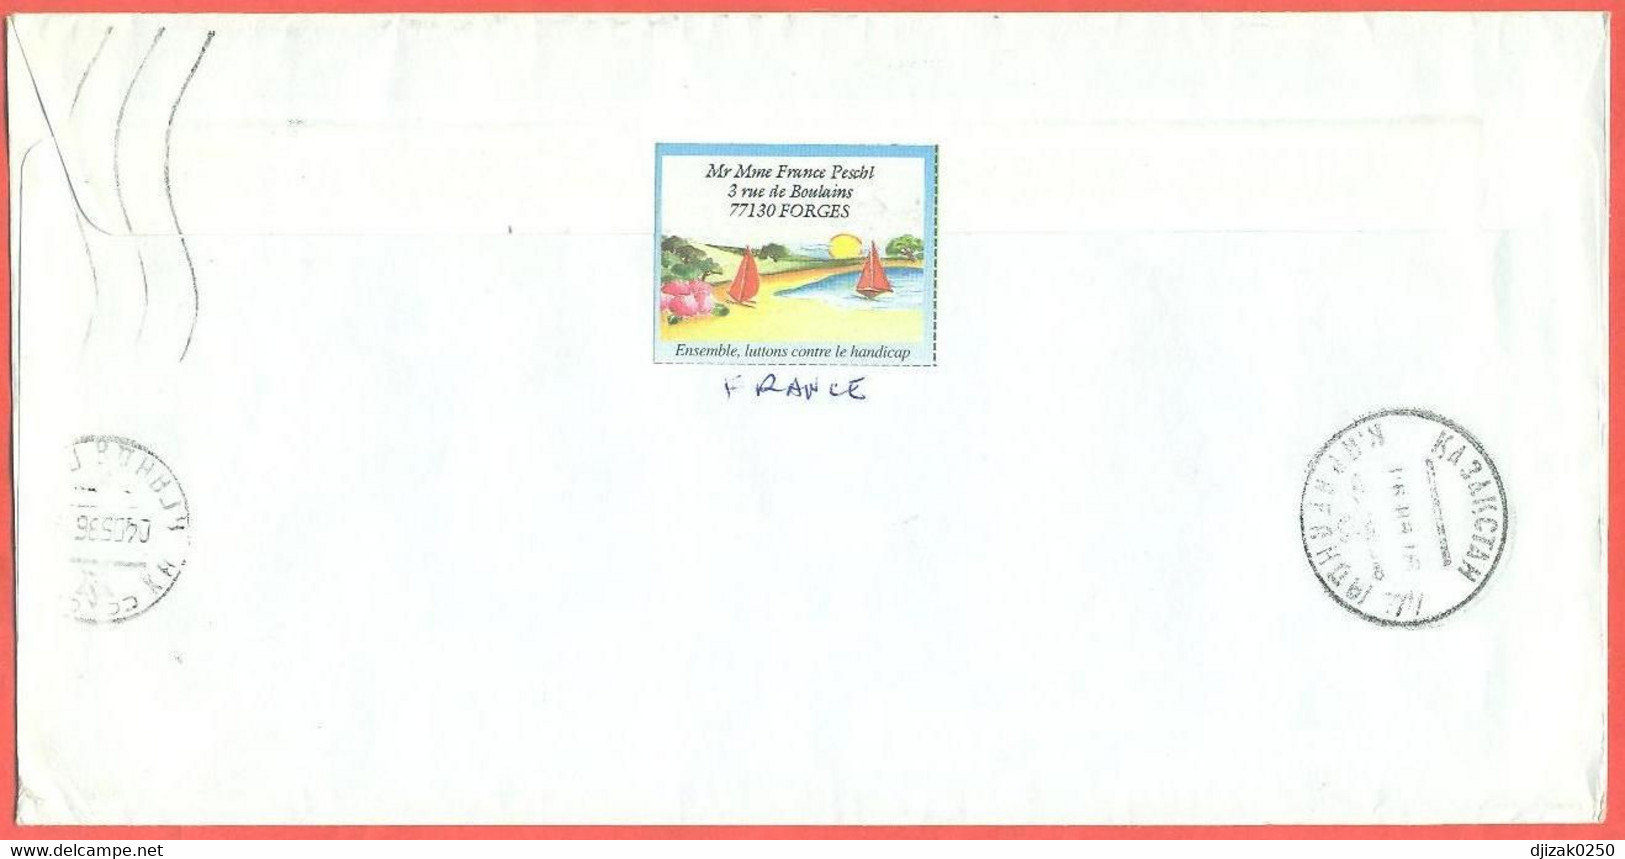 France 1996. The Envelope Passed Through The Mail. - Louis Pasteur